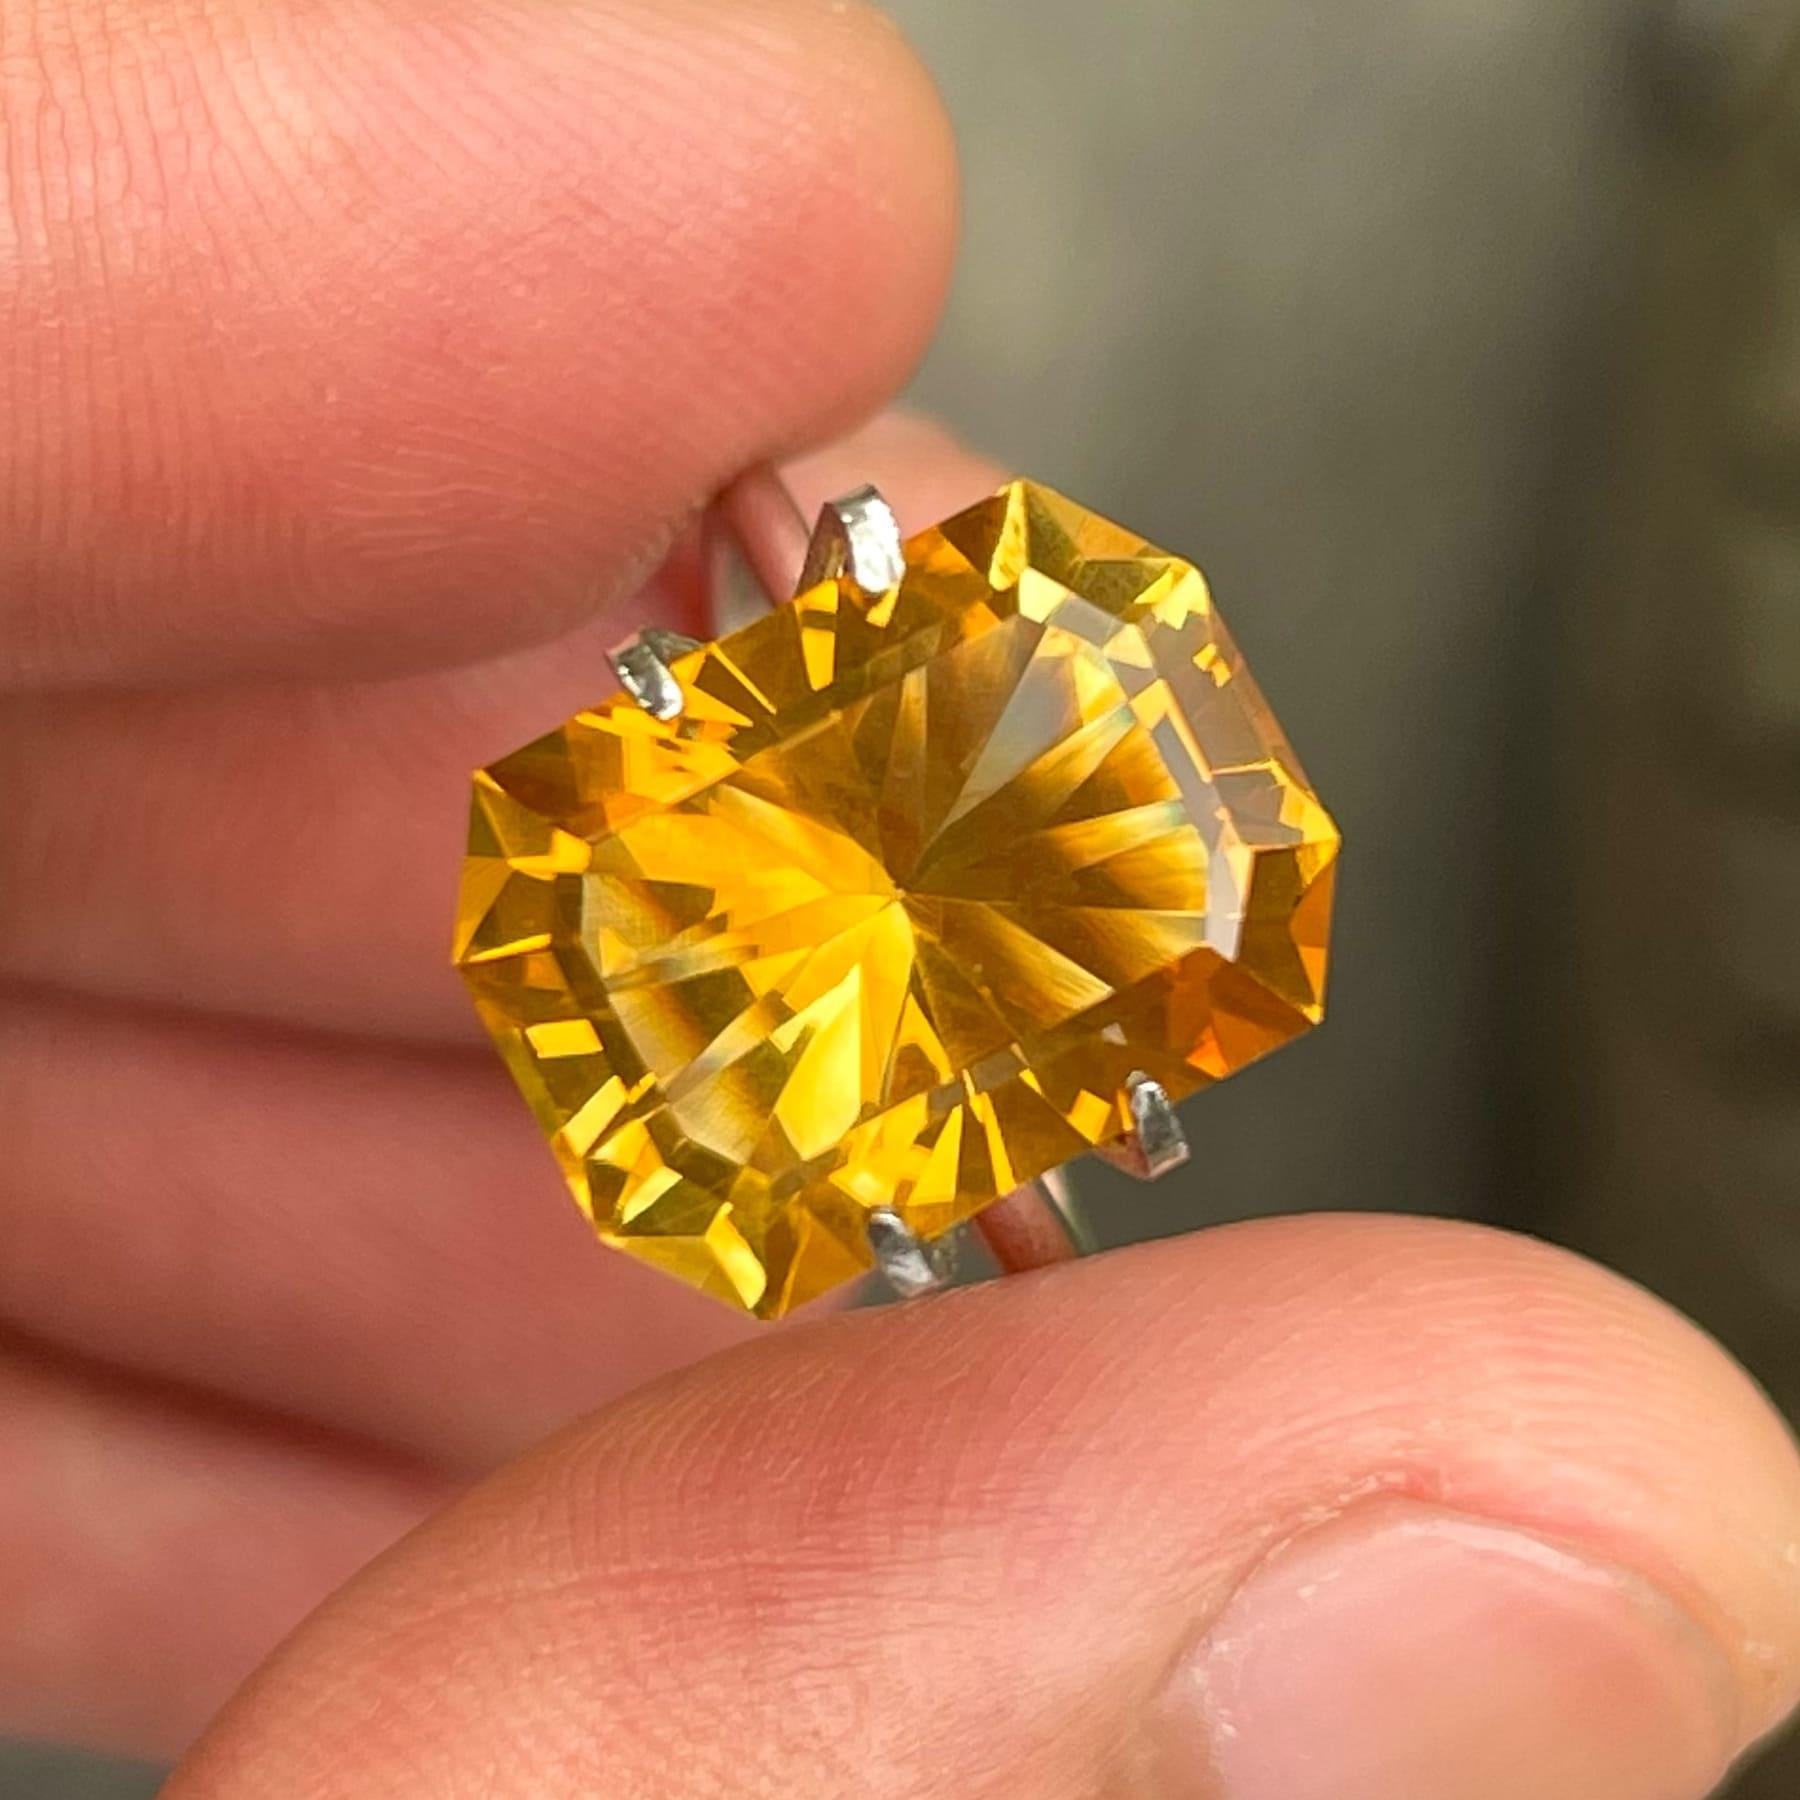 Deep Golden Citrine Gemstone for jewelry, available for sale, natural high-quality, Flawless Loupe Clean Clarity, 7.40 carats certified citrine gemstone from Brazil. citrine ring, citrine gem, citrine jewelry

Deep Golden Citrine Gemstone